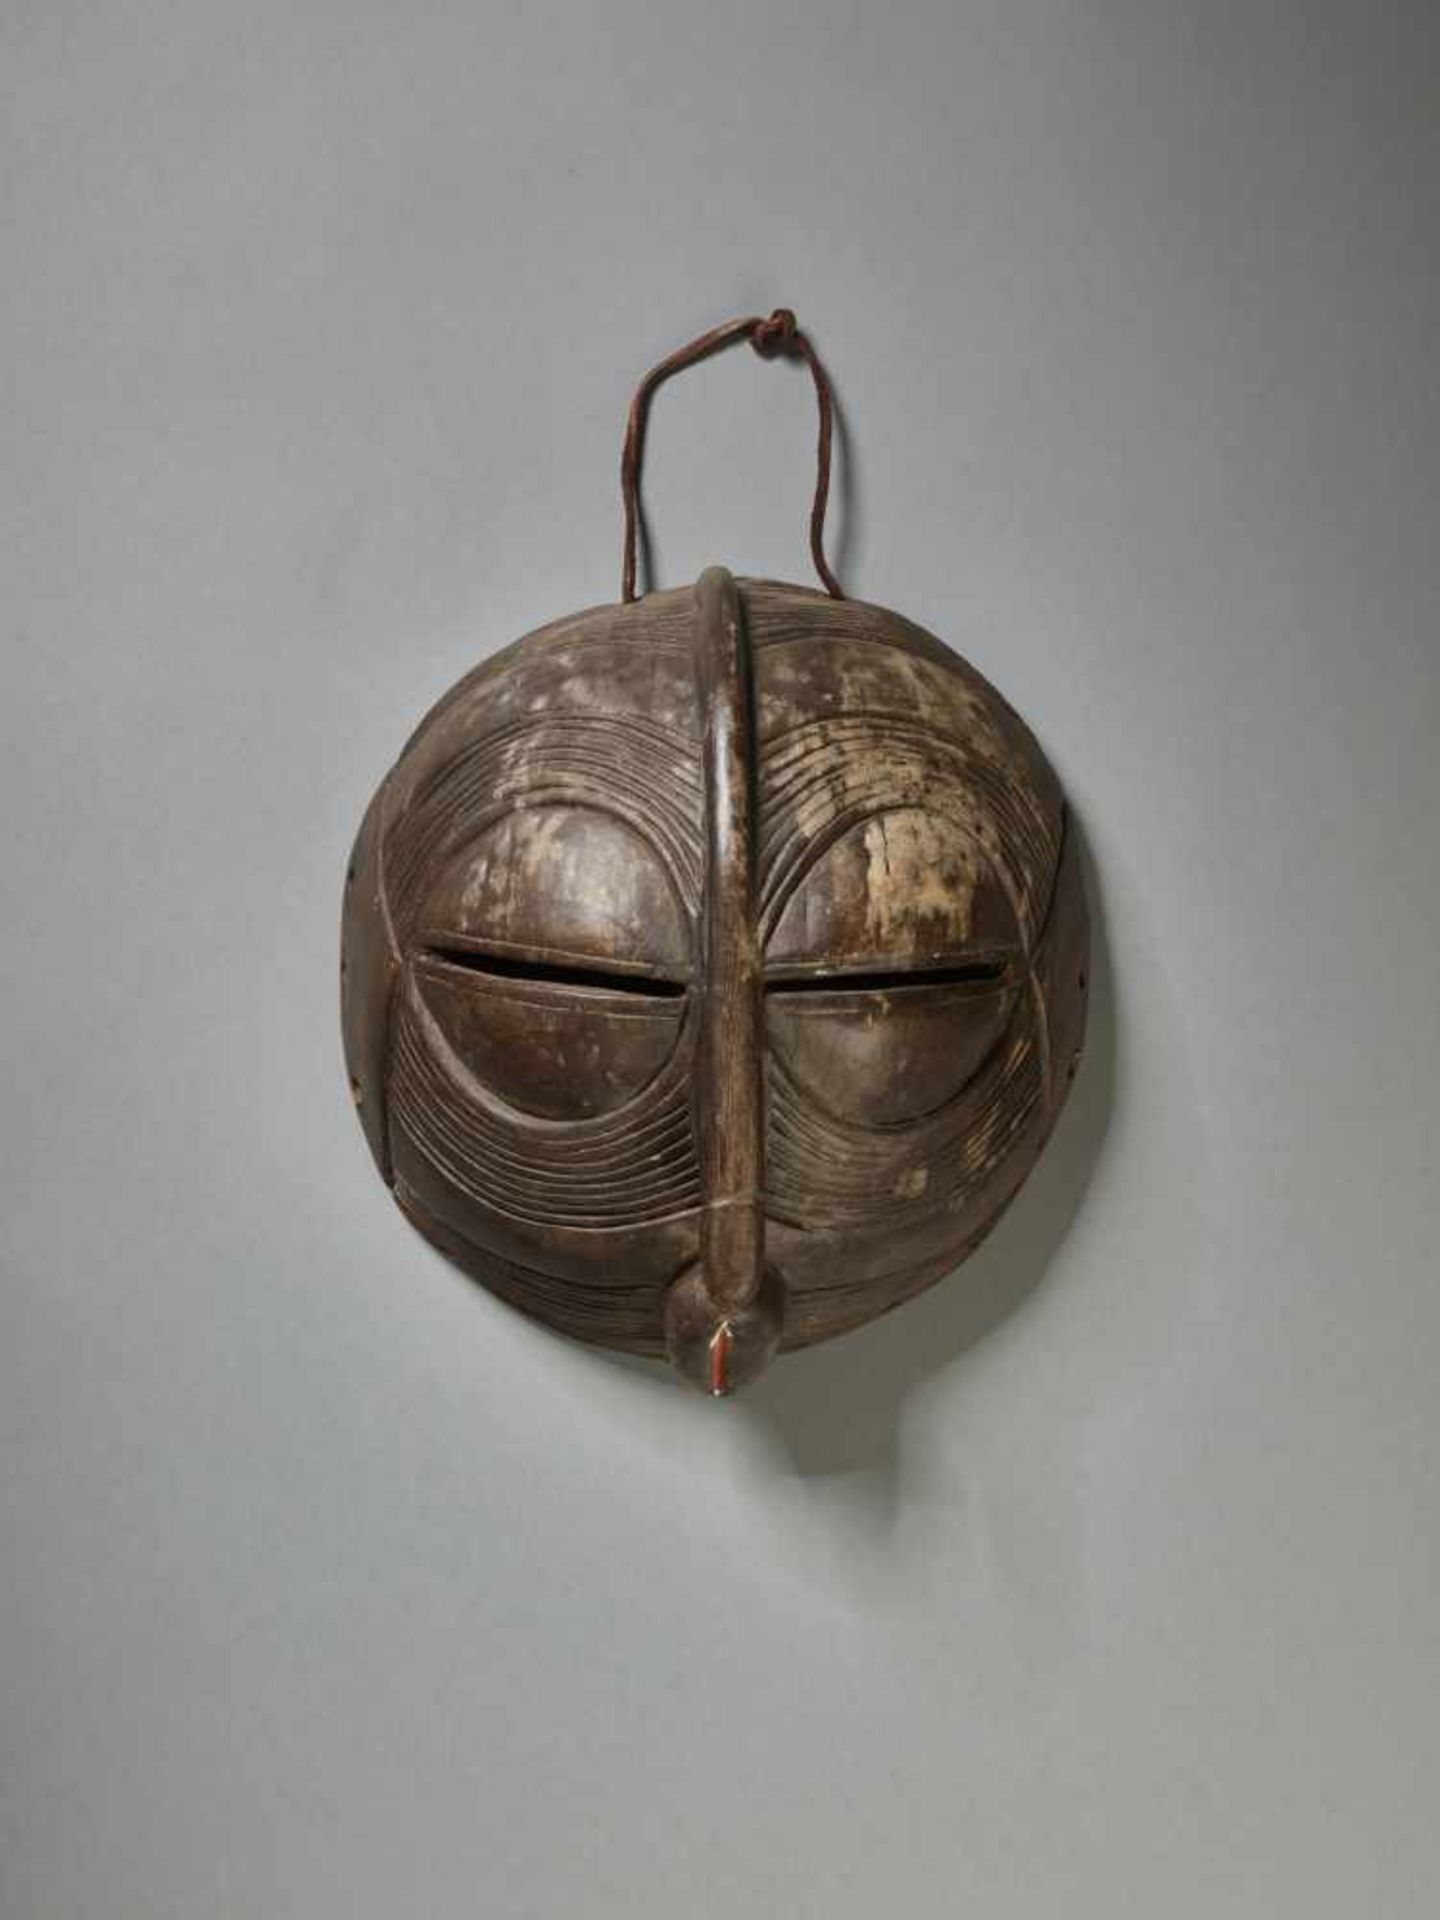 A ROUND KIFWEBE MASK, CONGO, LUBA PEOPLEWood with remnants of paint, leather stringDemocratic